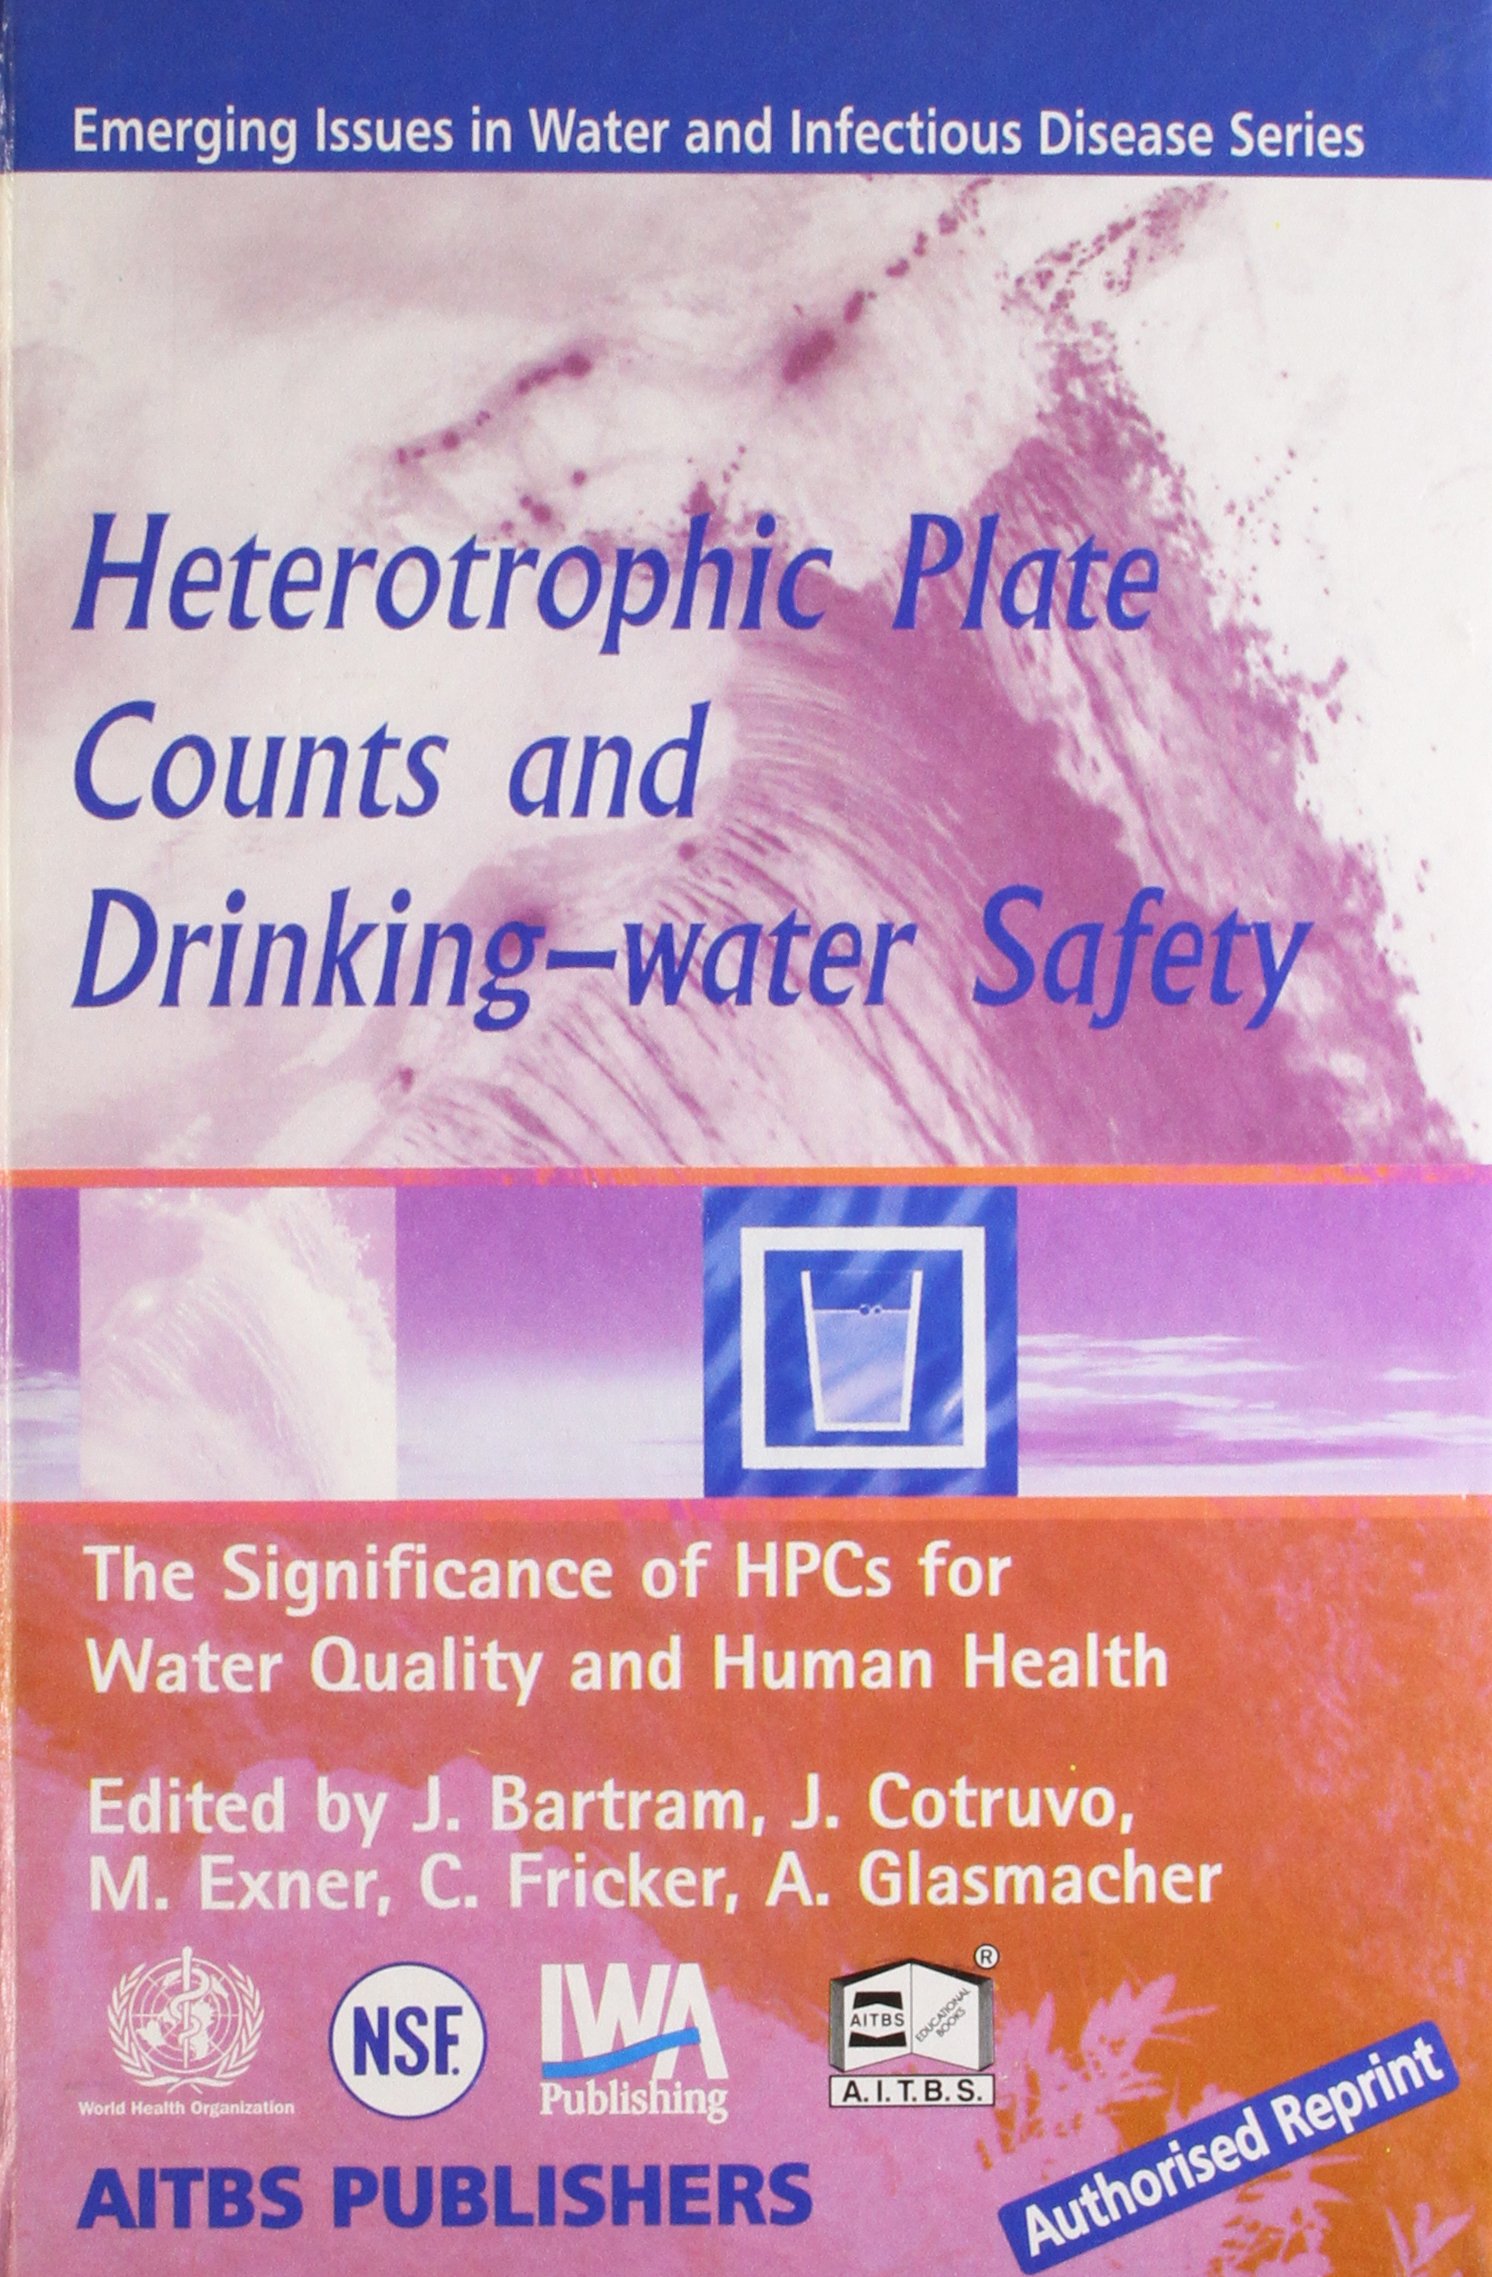 Heterotrophic Plate Counts and Drinking Water Safety